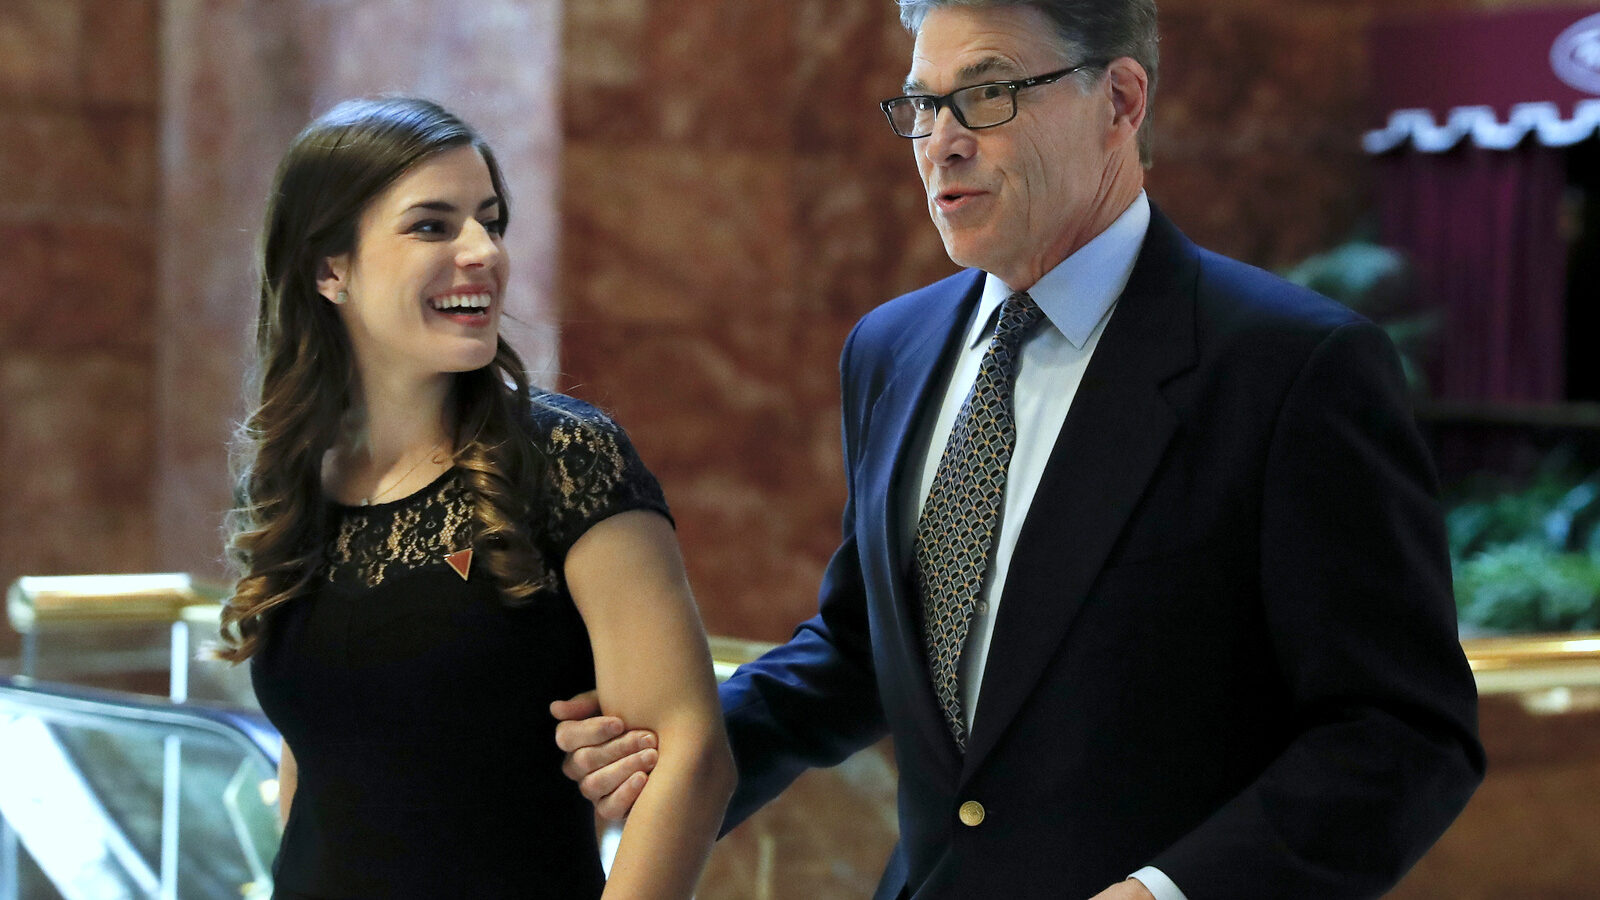 Former Texas Gov. Rick Perry, with Madeleine Westerhout of the Republican National Committee, arrives at Trump Tower, Monday, Nov. 21, 2016 in New York. AP/Carolyn Kaster)